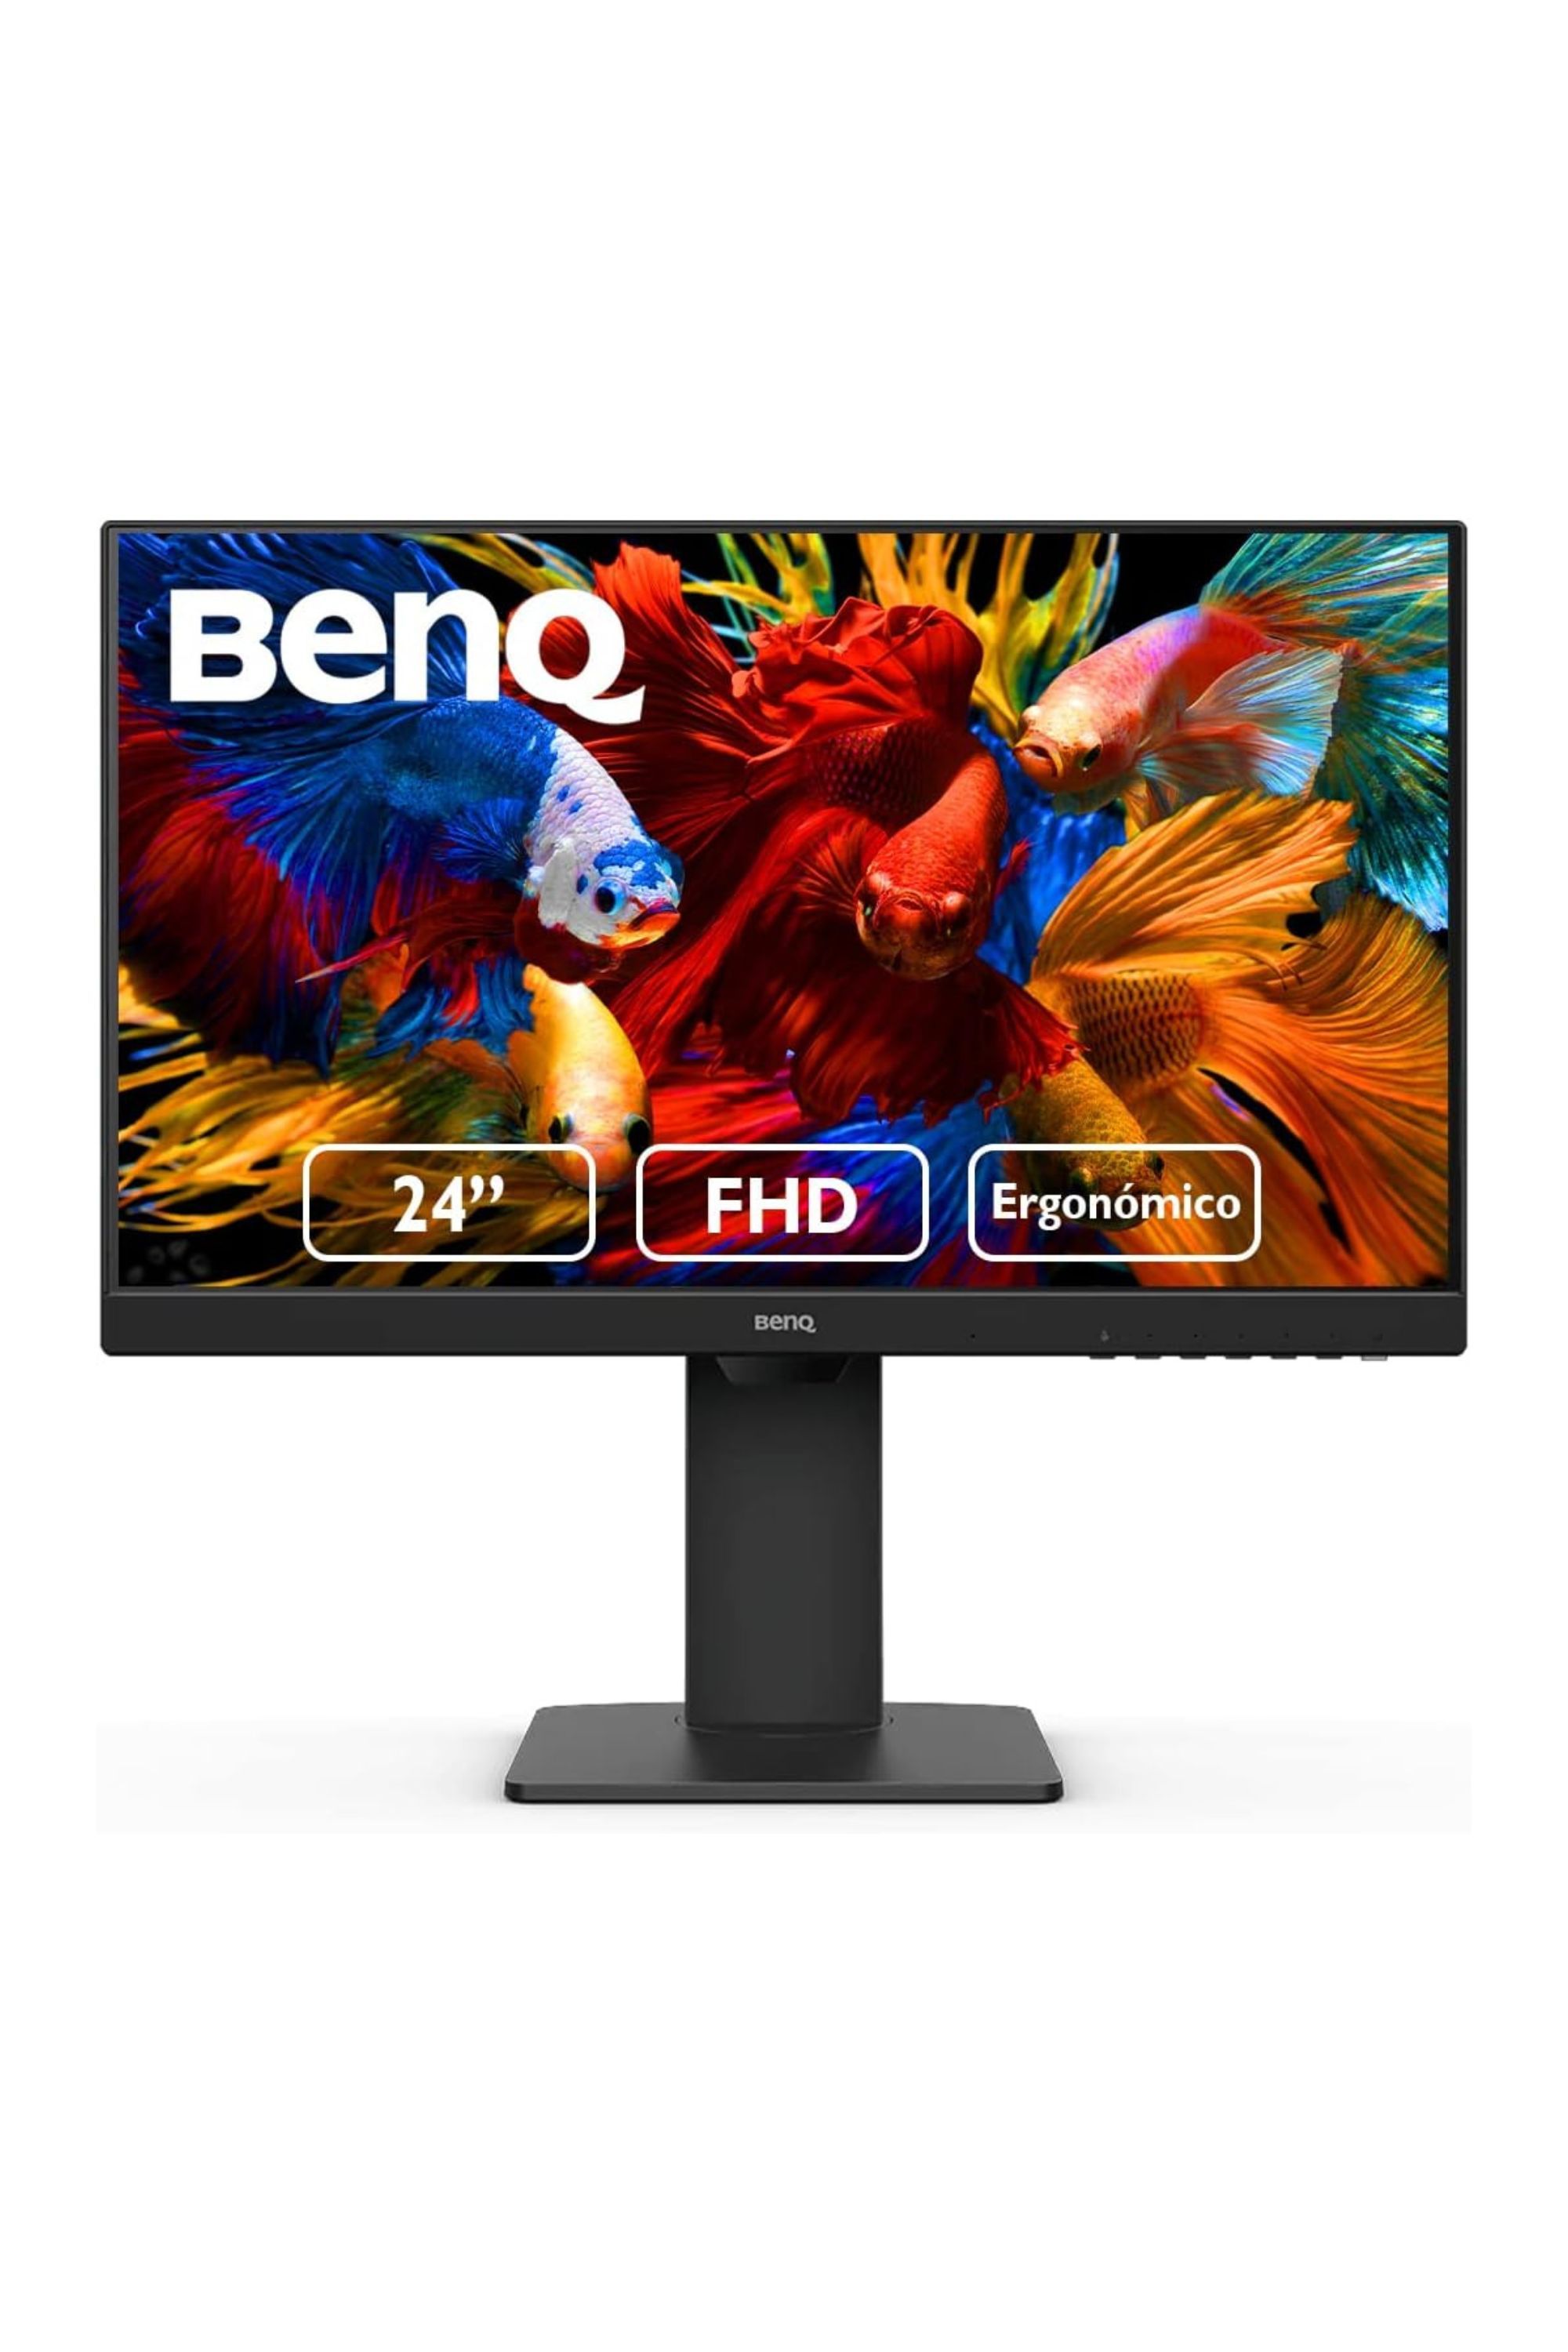 This 32-inch 1440p 144Hz monitor with FreeSync support is on sale for $290